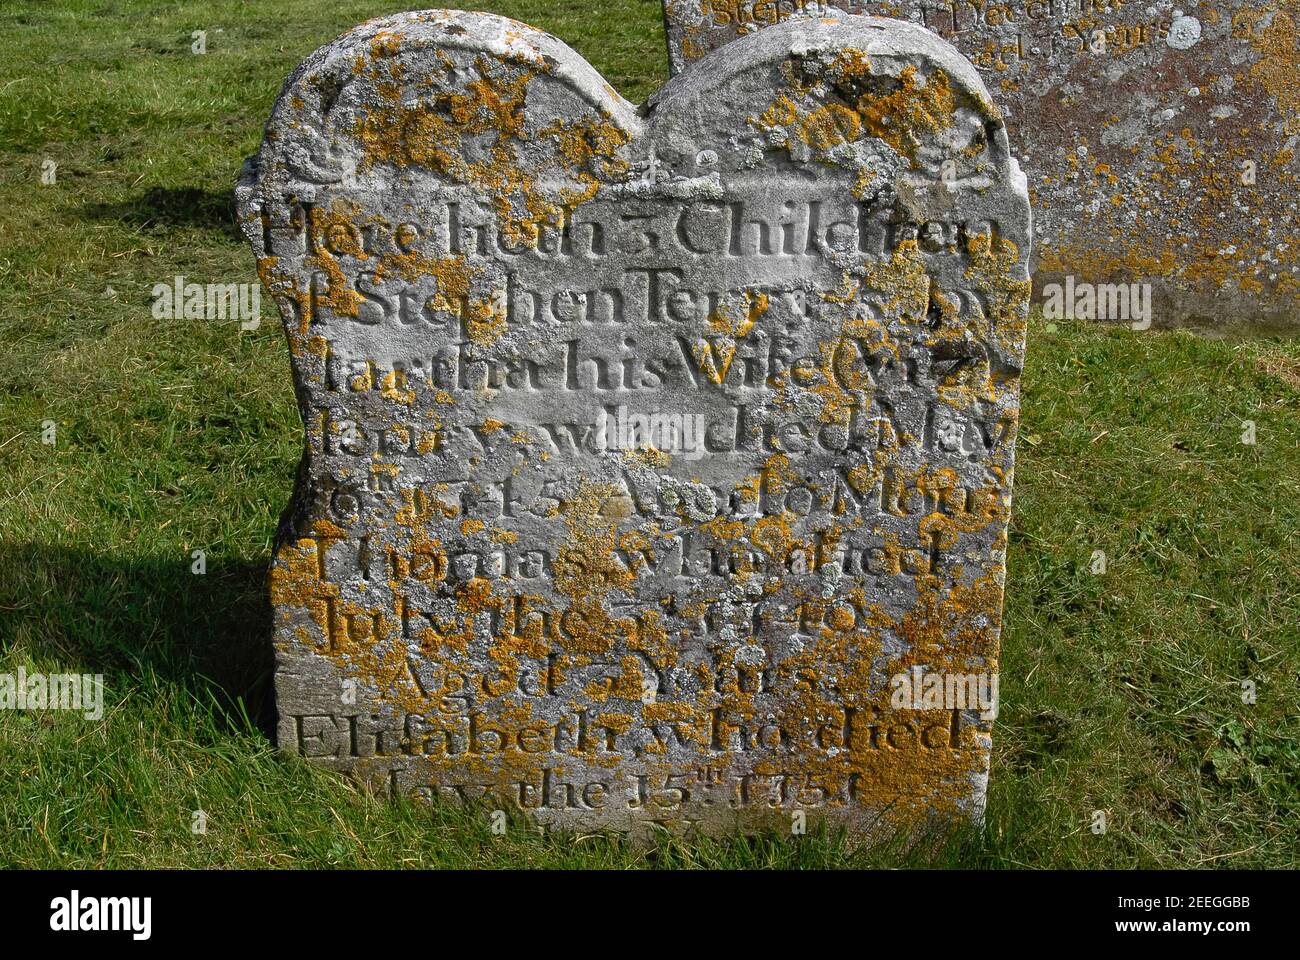 A sad but typical tale of 1700s English rural infant mortality is told by this headstone in the graveyard of St Augustine’s parish church at Brookland, Kent, amid the low-lying wetlands of Walland Marsh.  It records the death in infancy or childhood between 1740 and 1751 of three children born to Martha and Stephen Terry - at a time when infant death rates in marshland parishes were two to three times higher than in downland villages.  Romney and Walland marshes were afflicted by infectious and chronic diseases such as bubonic plague and smallpox - and by malaria, which was once endemic. Stock Photo